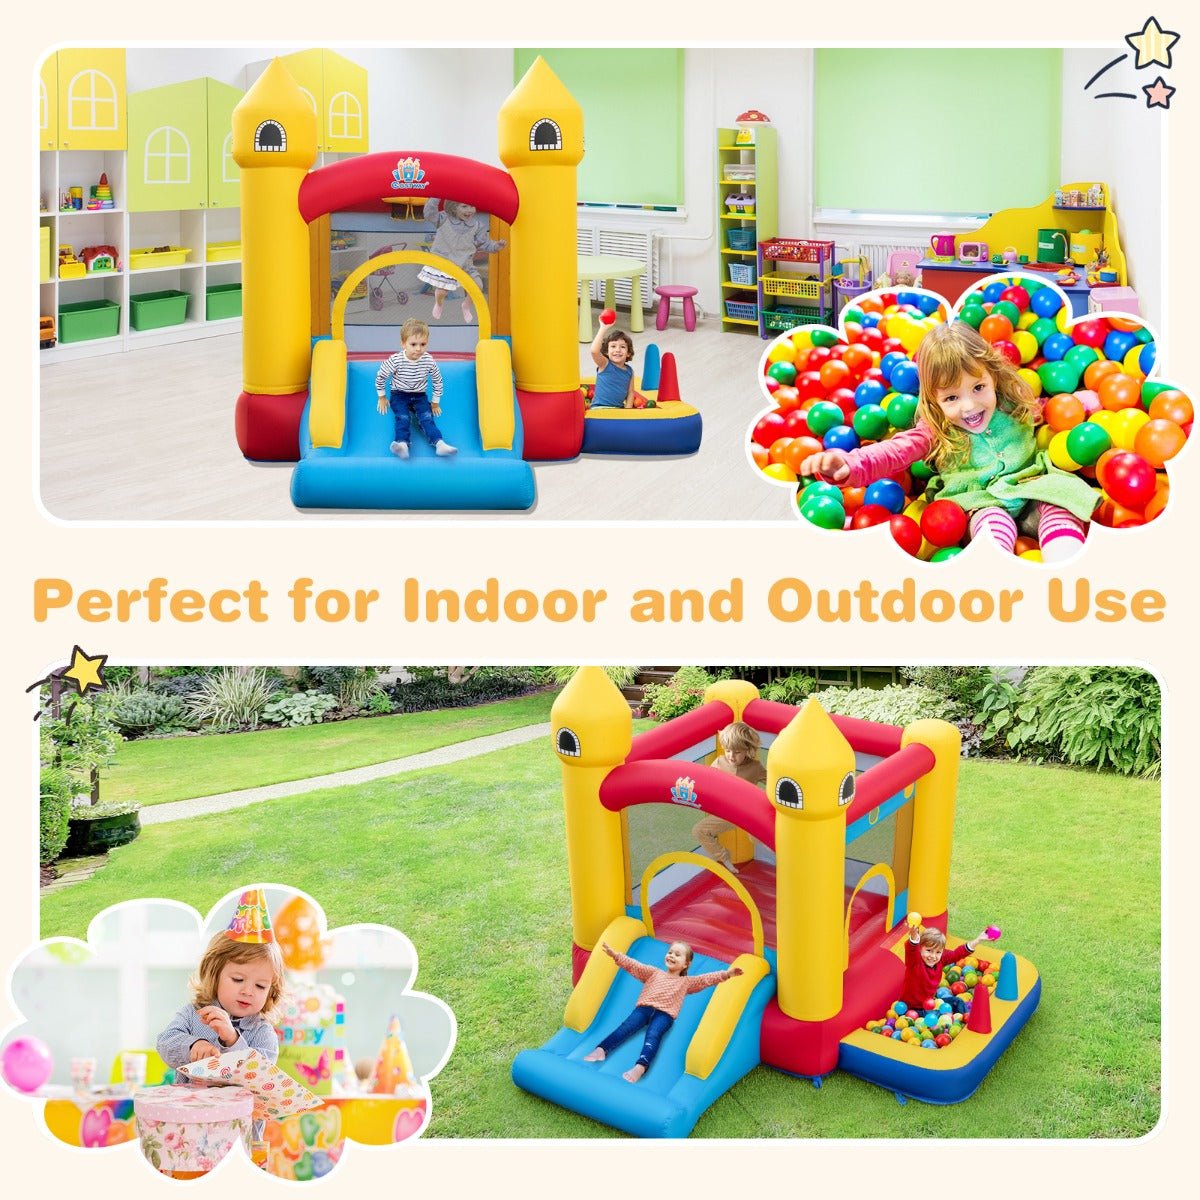 5-in-1 Inflatable Bounce Castle with Slide Ball Pit and Basketball Hoop